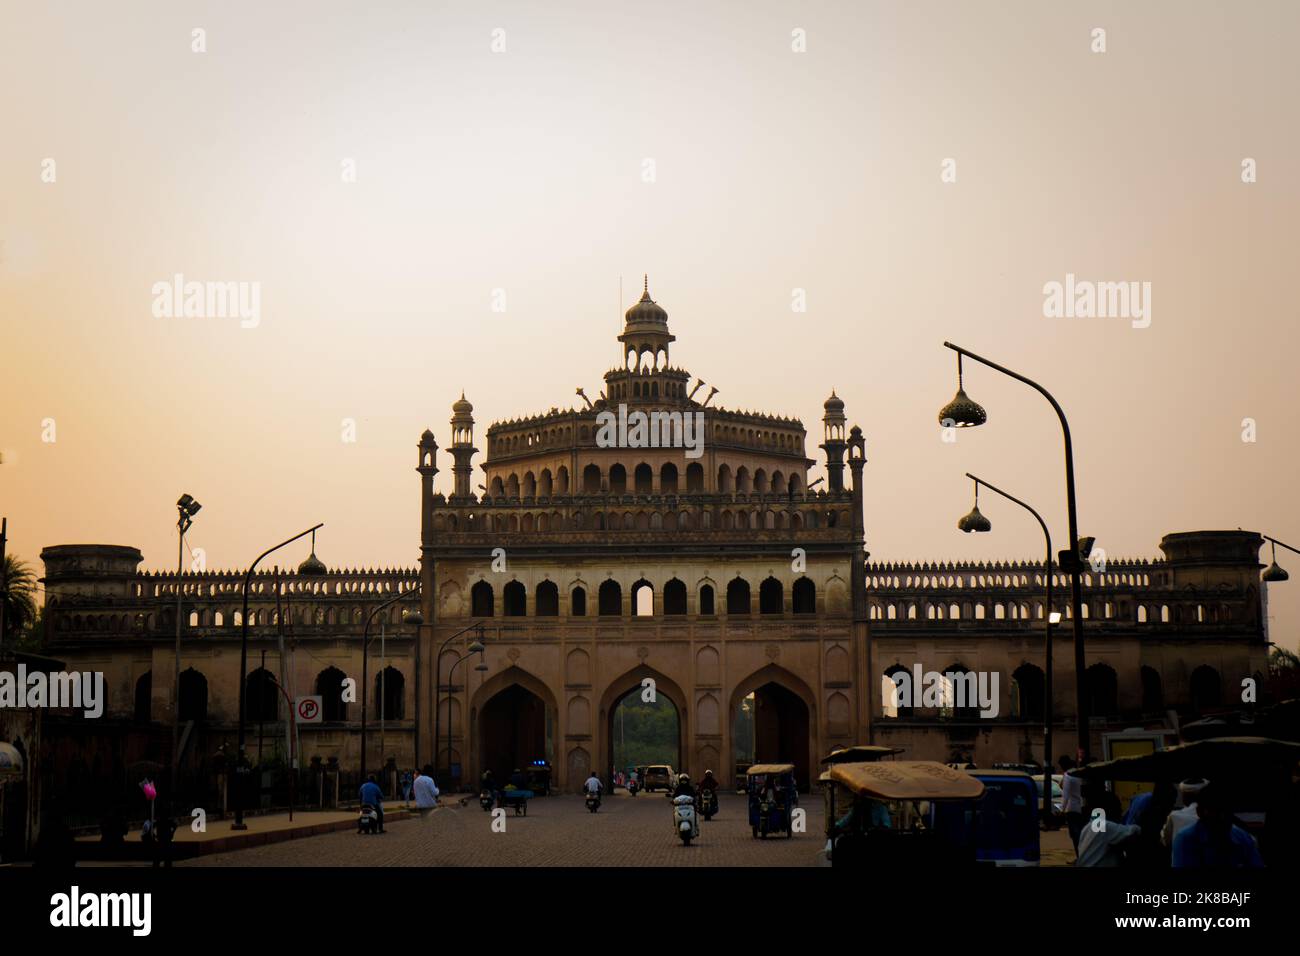 The Rumi Gate entrance in Lucknow City of India. Stock Photo